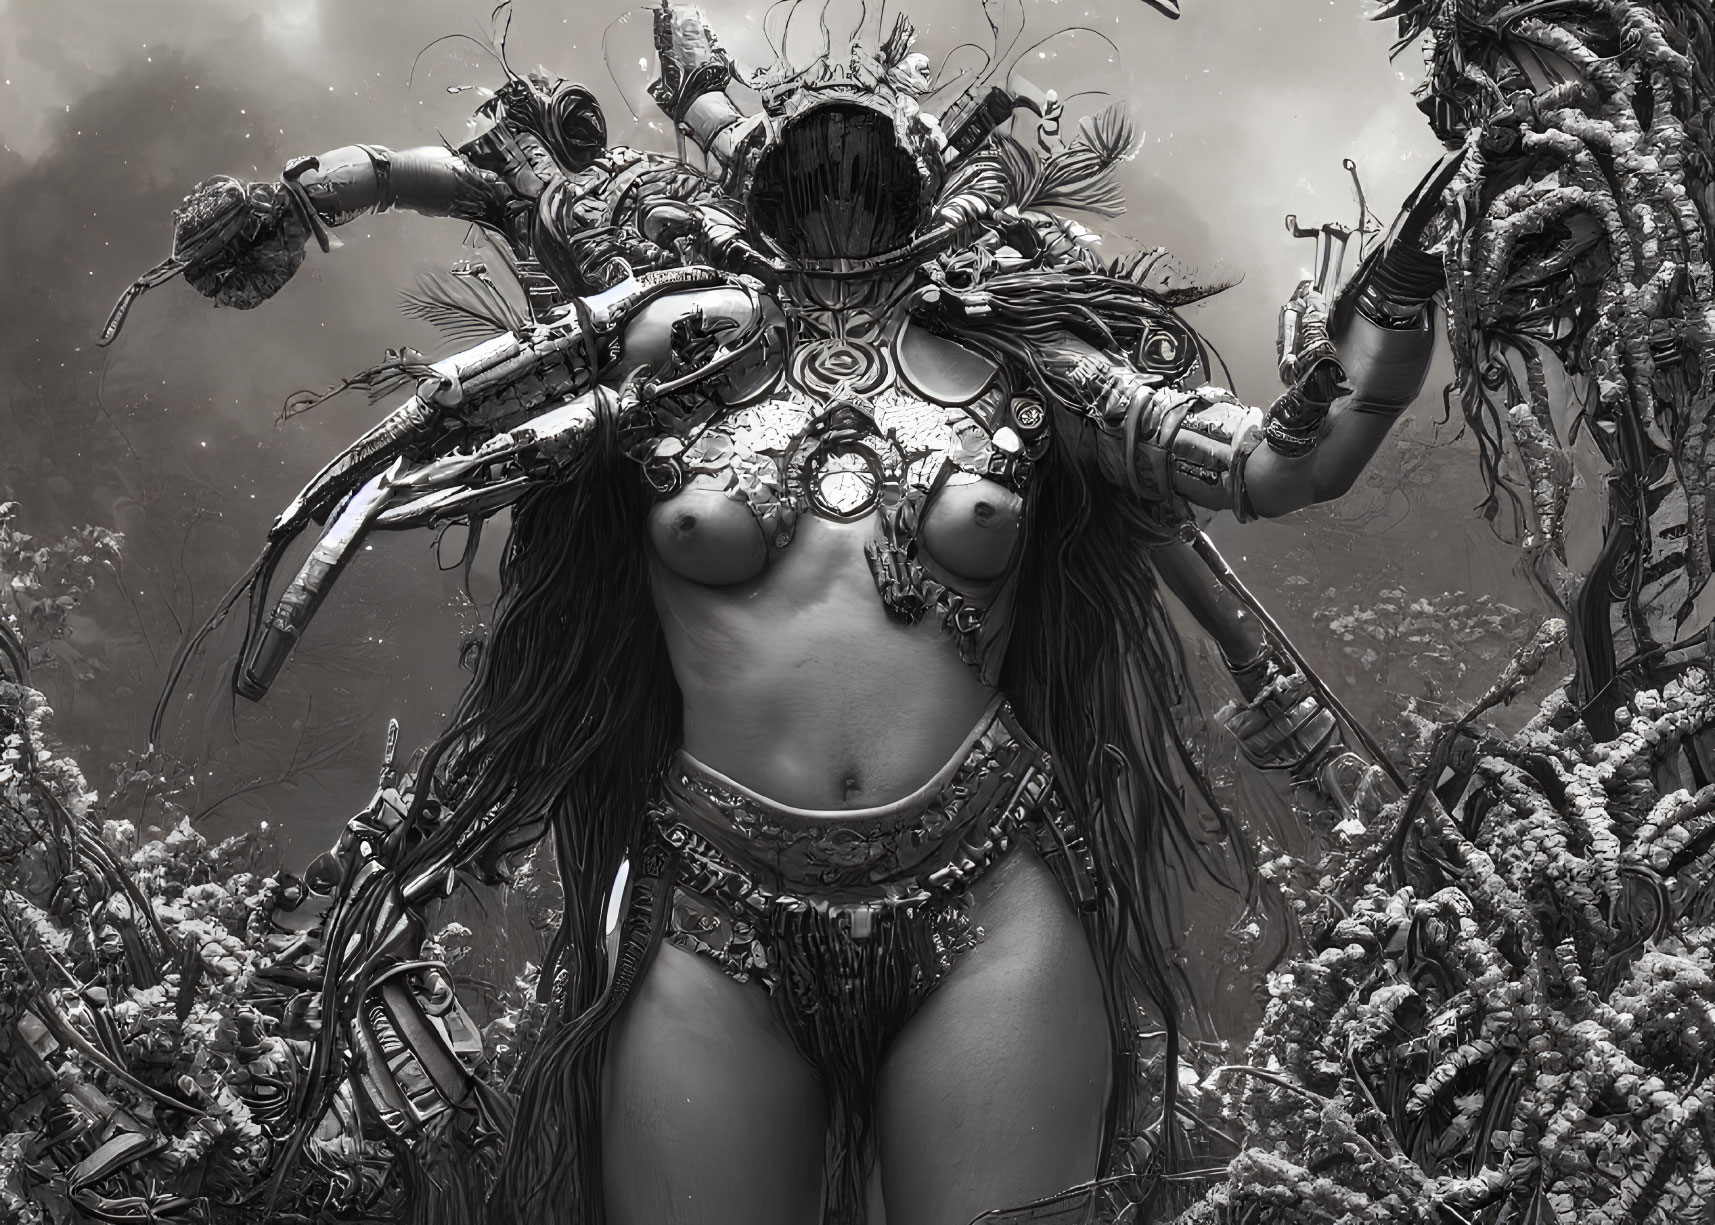 Detailed Monochrome Cybernetic Female Figure with Mechanical Tendrils